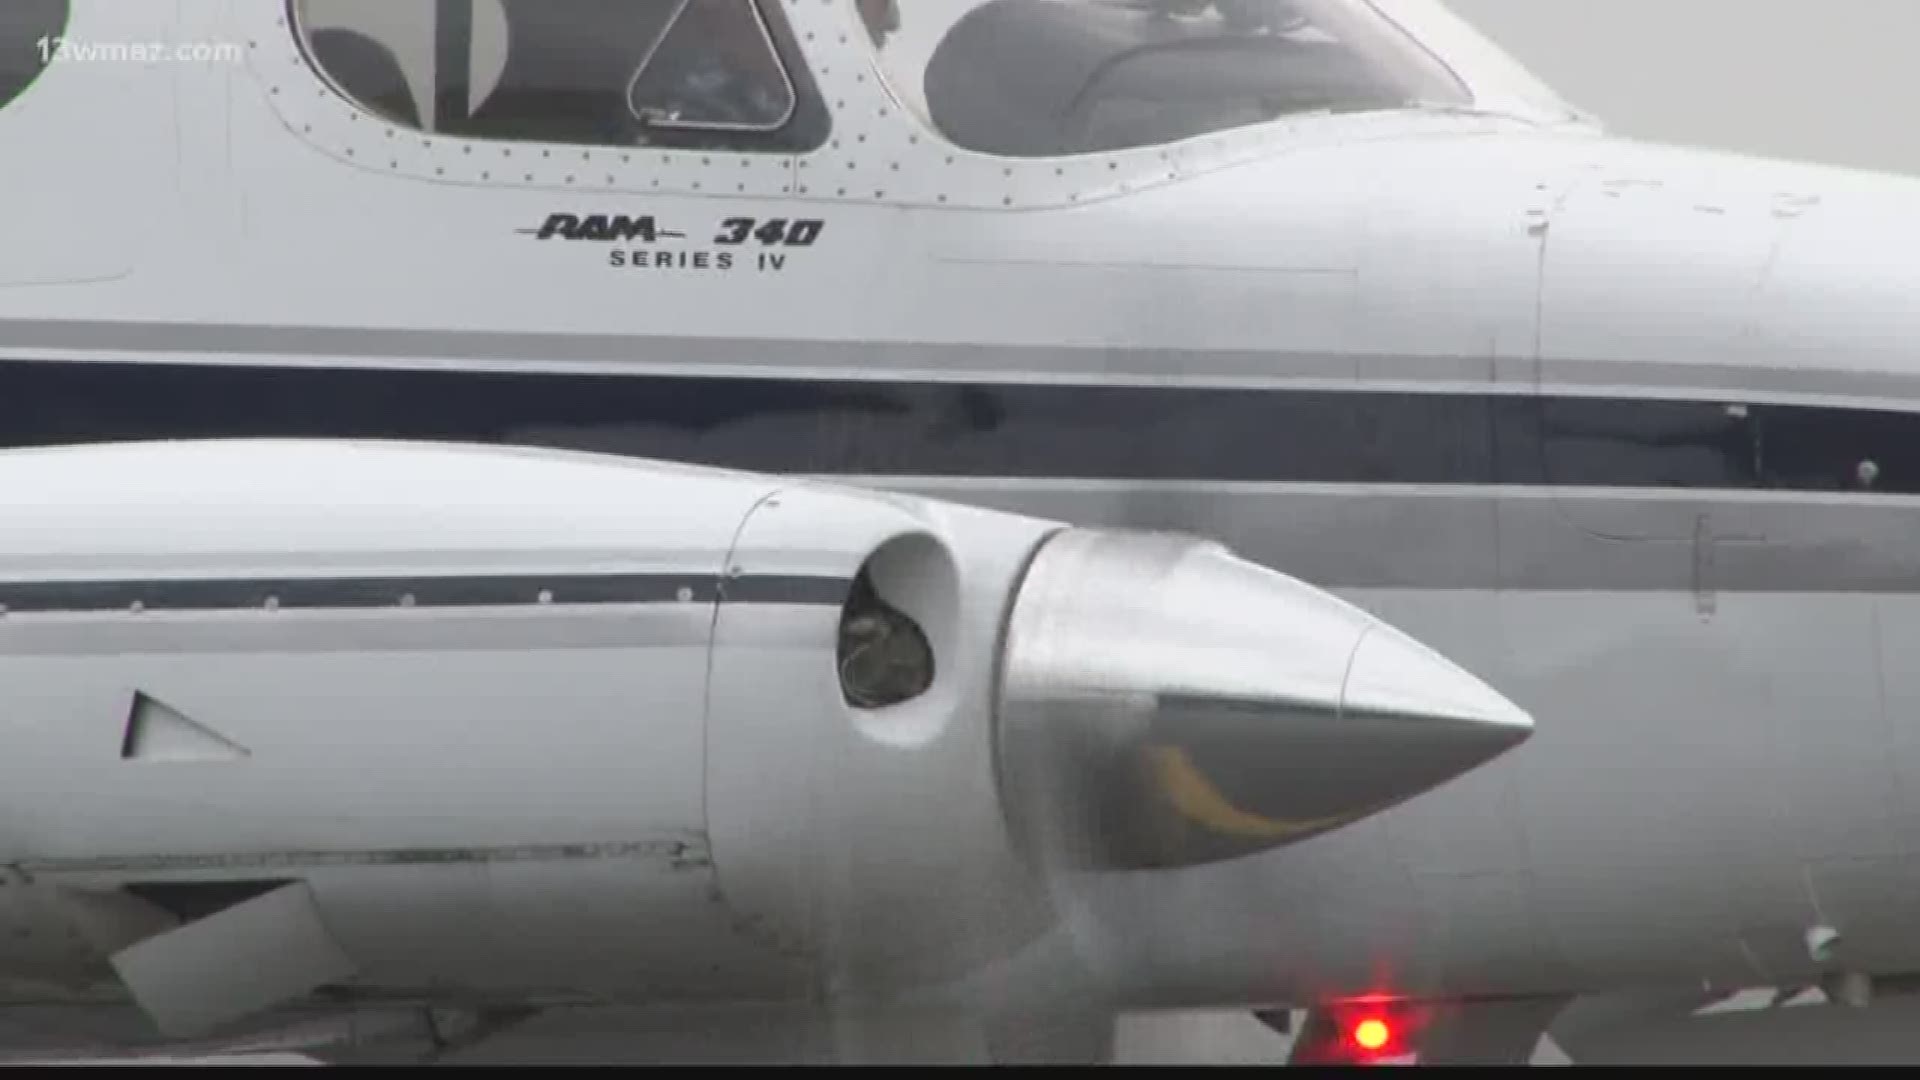 Some people are evacuating Florida ahead of the hurricane, but a few planes are seeking shelter too. The ramp space at Lowe Aviation is packed with almost 30 of the same kind of planes and more are on the way.